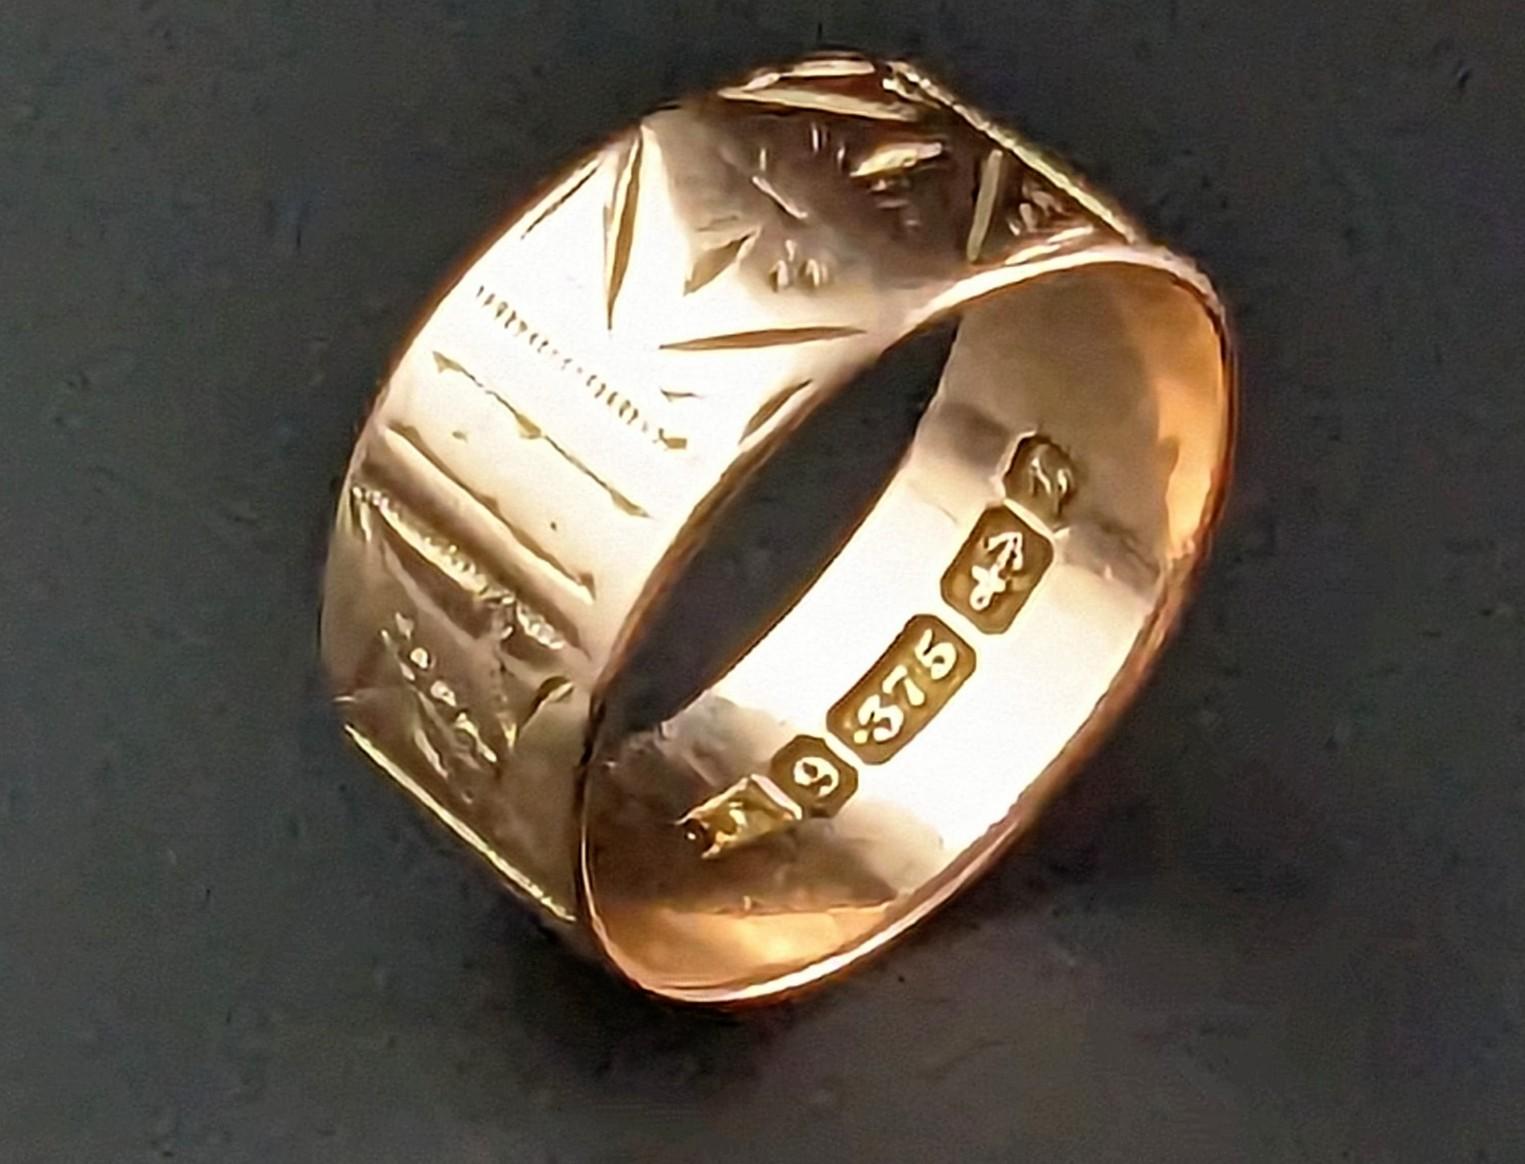 You can't help but be charmed by these old gold engraved band rings.

This Victorian era 9kt Rose gold, engraved band ring leans into the romantic sentiments of the Victorians, simplicity but engraved with a pretty geometric pattern to add a little